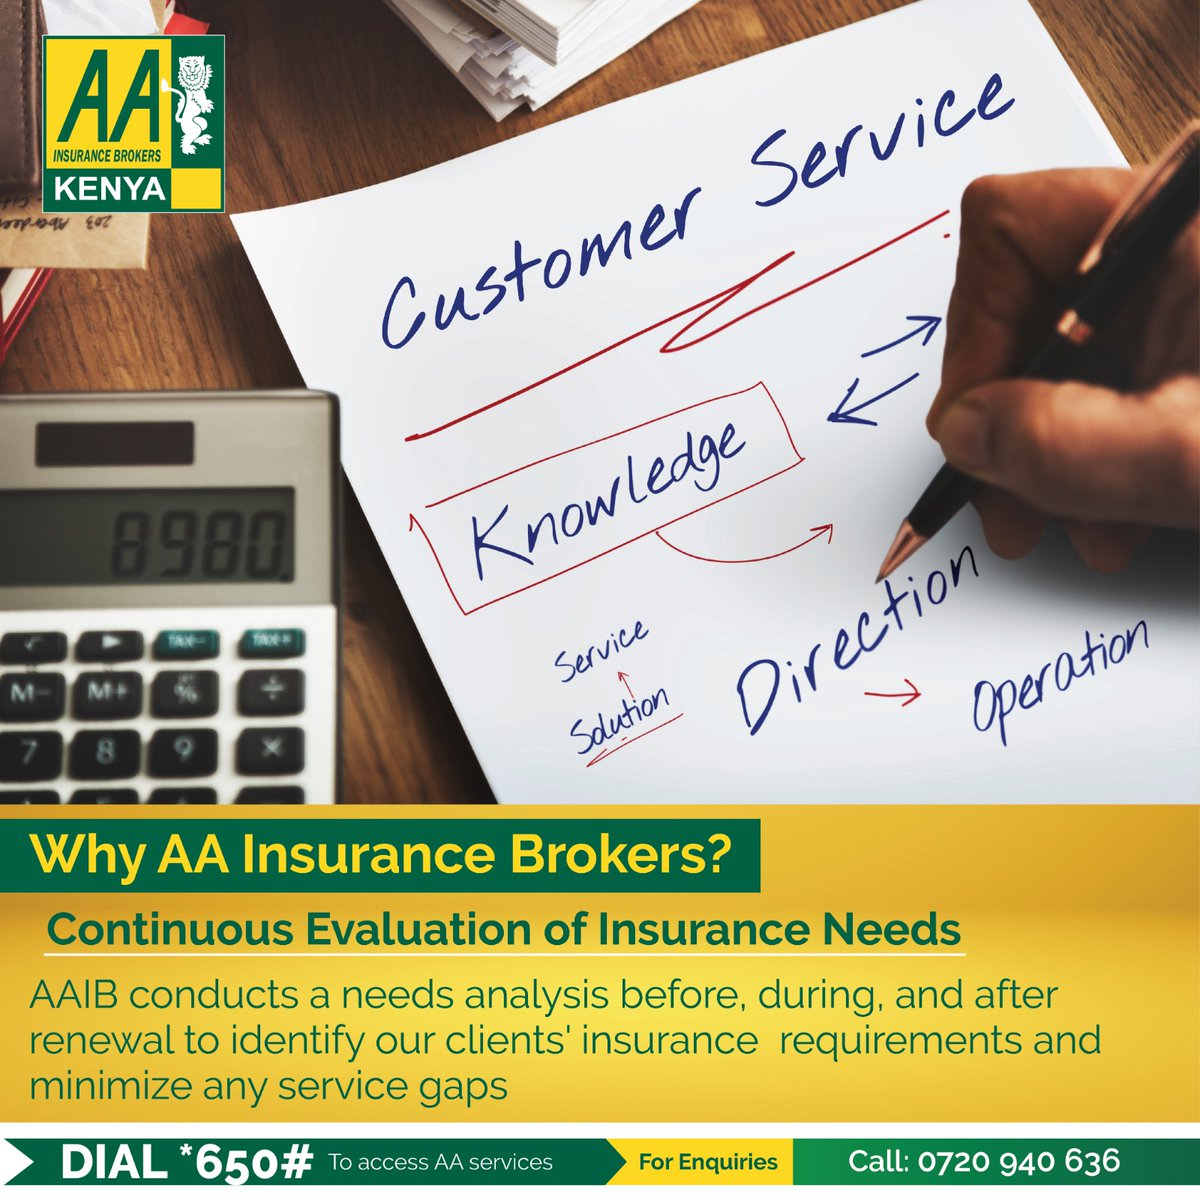 Insurance tailored to you, at every step! At AA Insurance Brokers, we understand the importance of continuous evaluation. We assess your insurance needs before, during, and after renewal to identify and bridge any gaps in service. Insure with us, call us on 0720940636
#AAIBCares